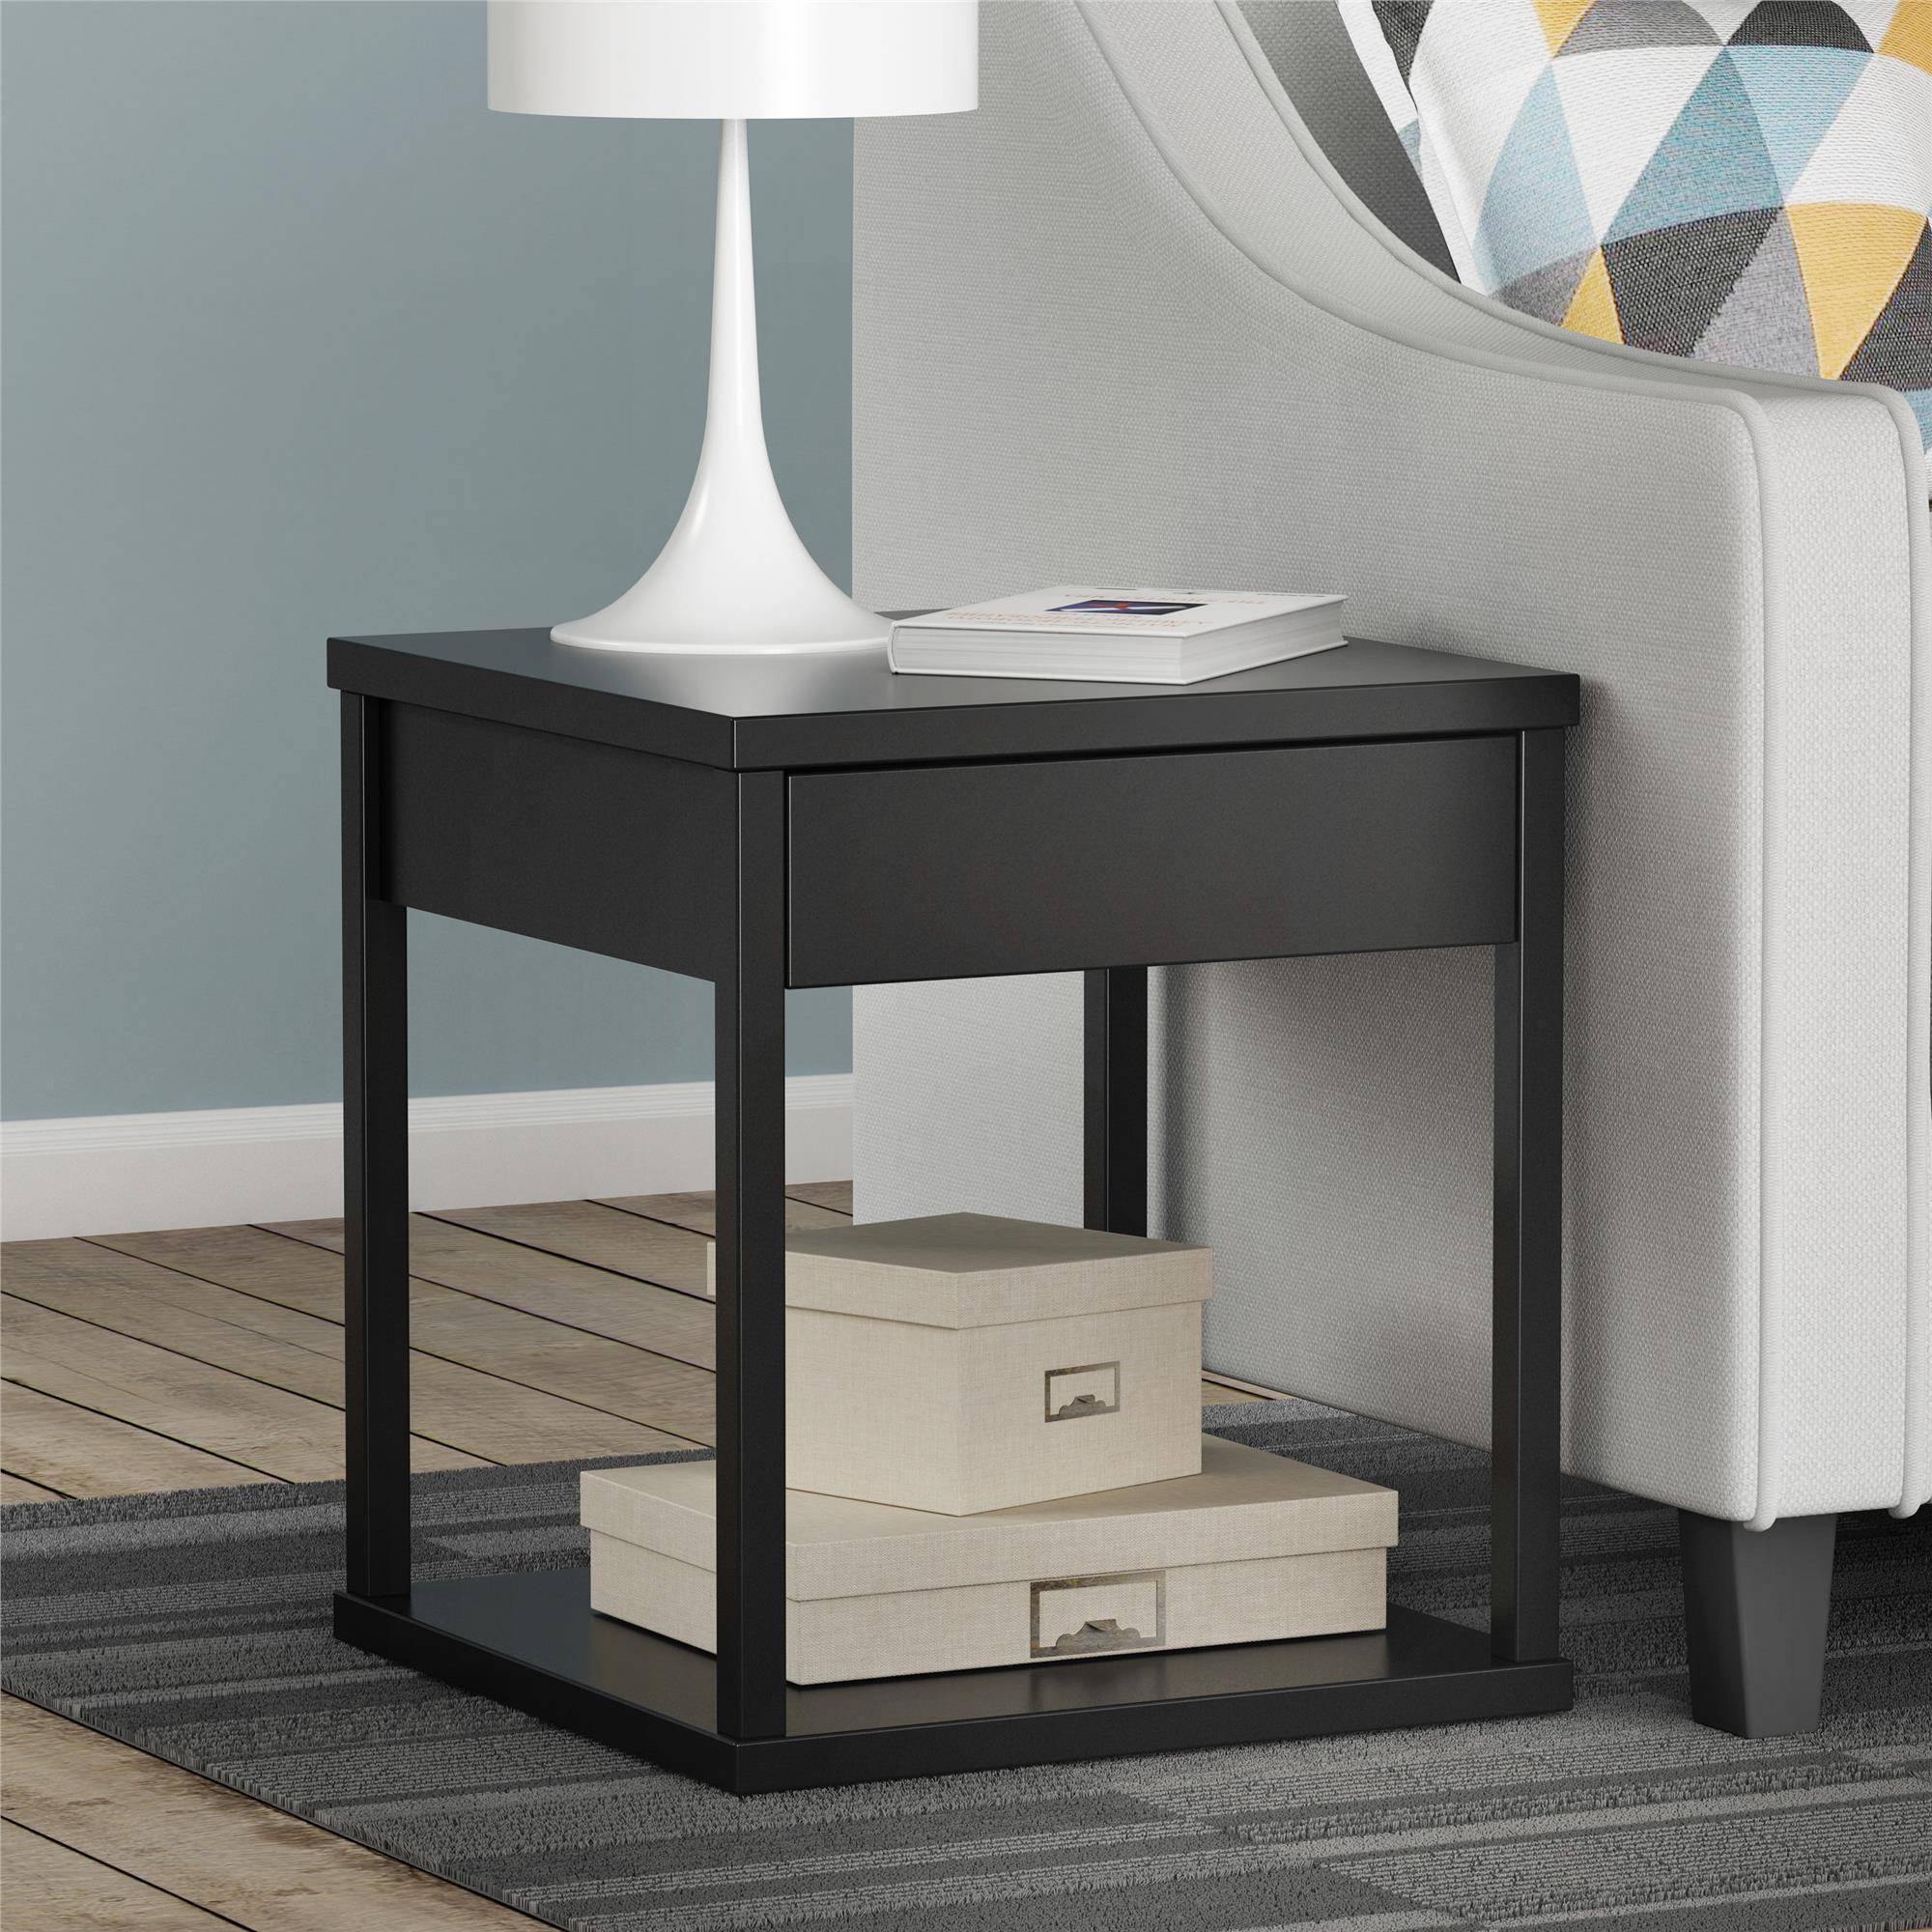 mainstays parsons end table with drawer multiple colors accent marble low glass side dining room cabinets accents small plastic outdoor bbq mirror living cool lamps modern media